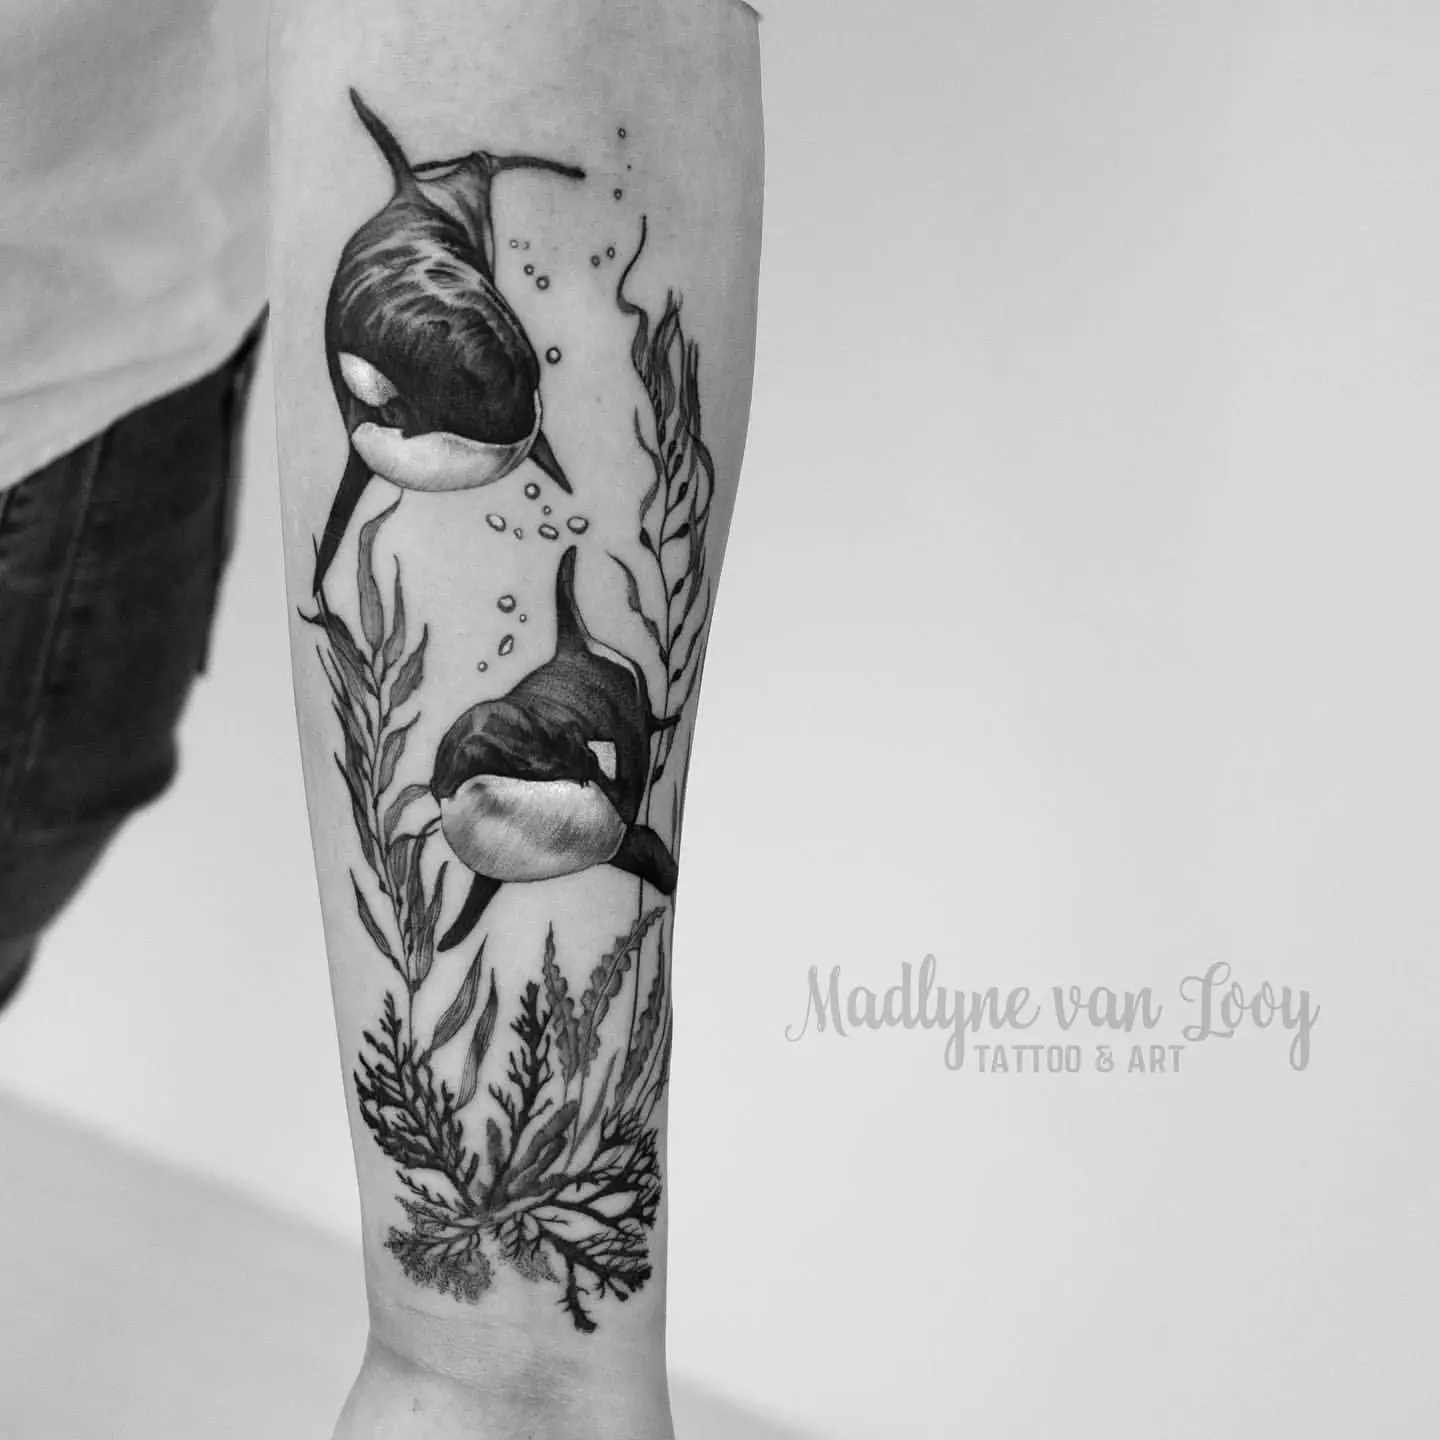 Orca Tattoo Meaning: Unraveling the Stories Behind Symbolic Body Art